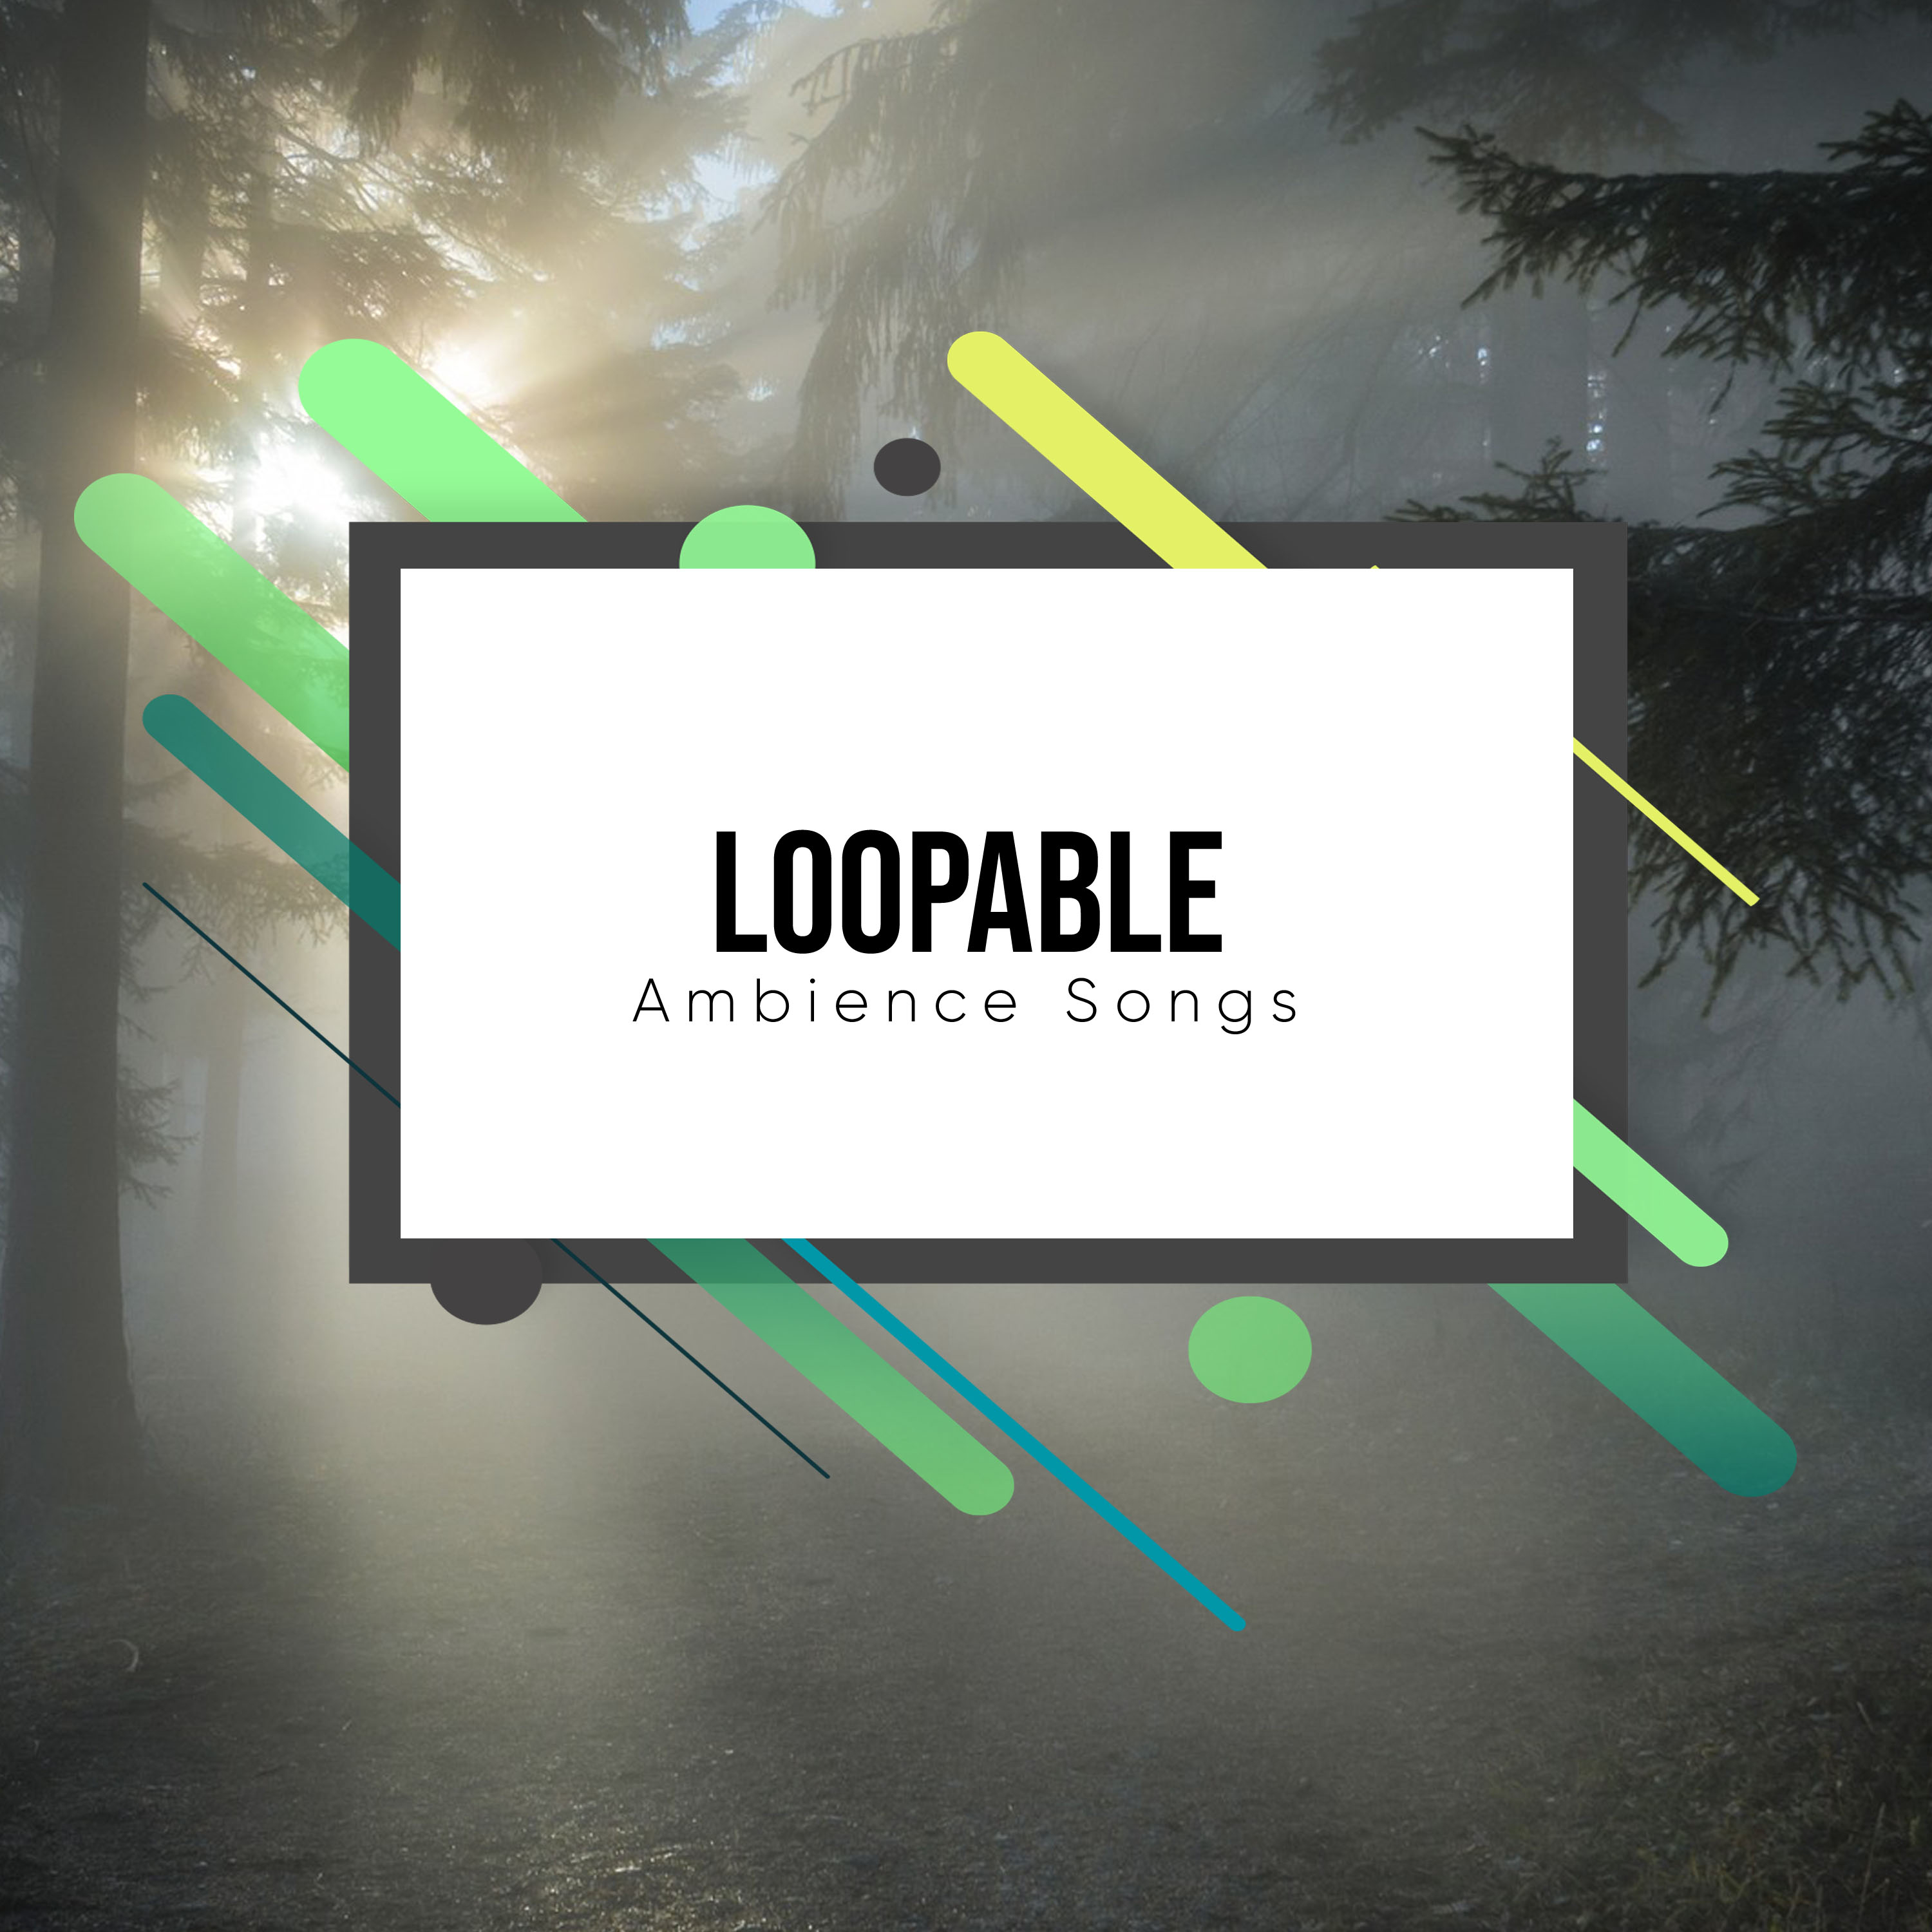 #18 Loopable Ambience Songs to Calm the Mind